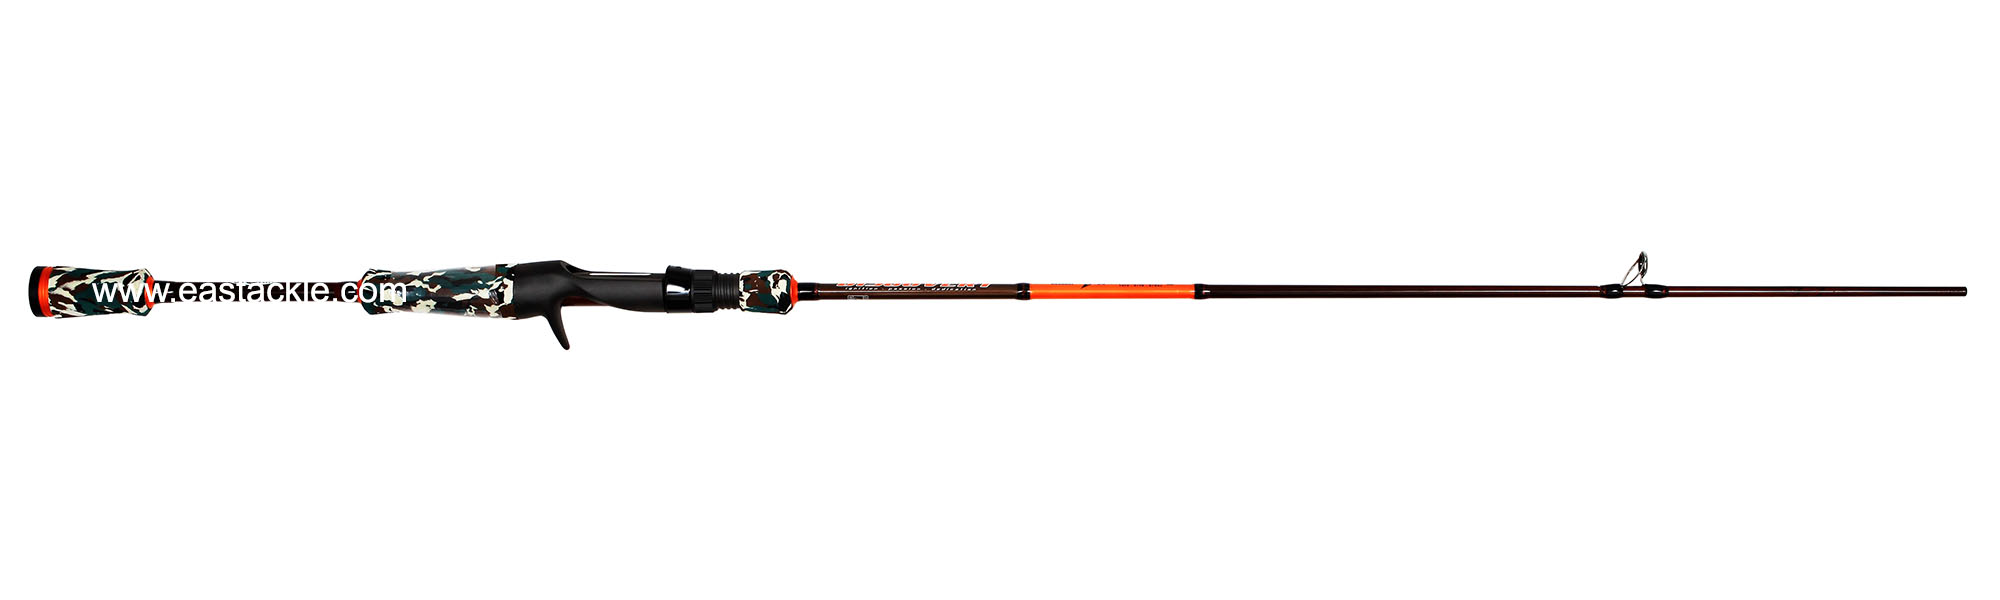 Storm - Discovery - DVC662MH - Bait Casting Rod - Butt to Stripper Guide (Side View) | Eastackle